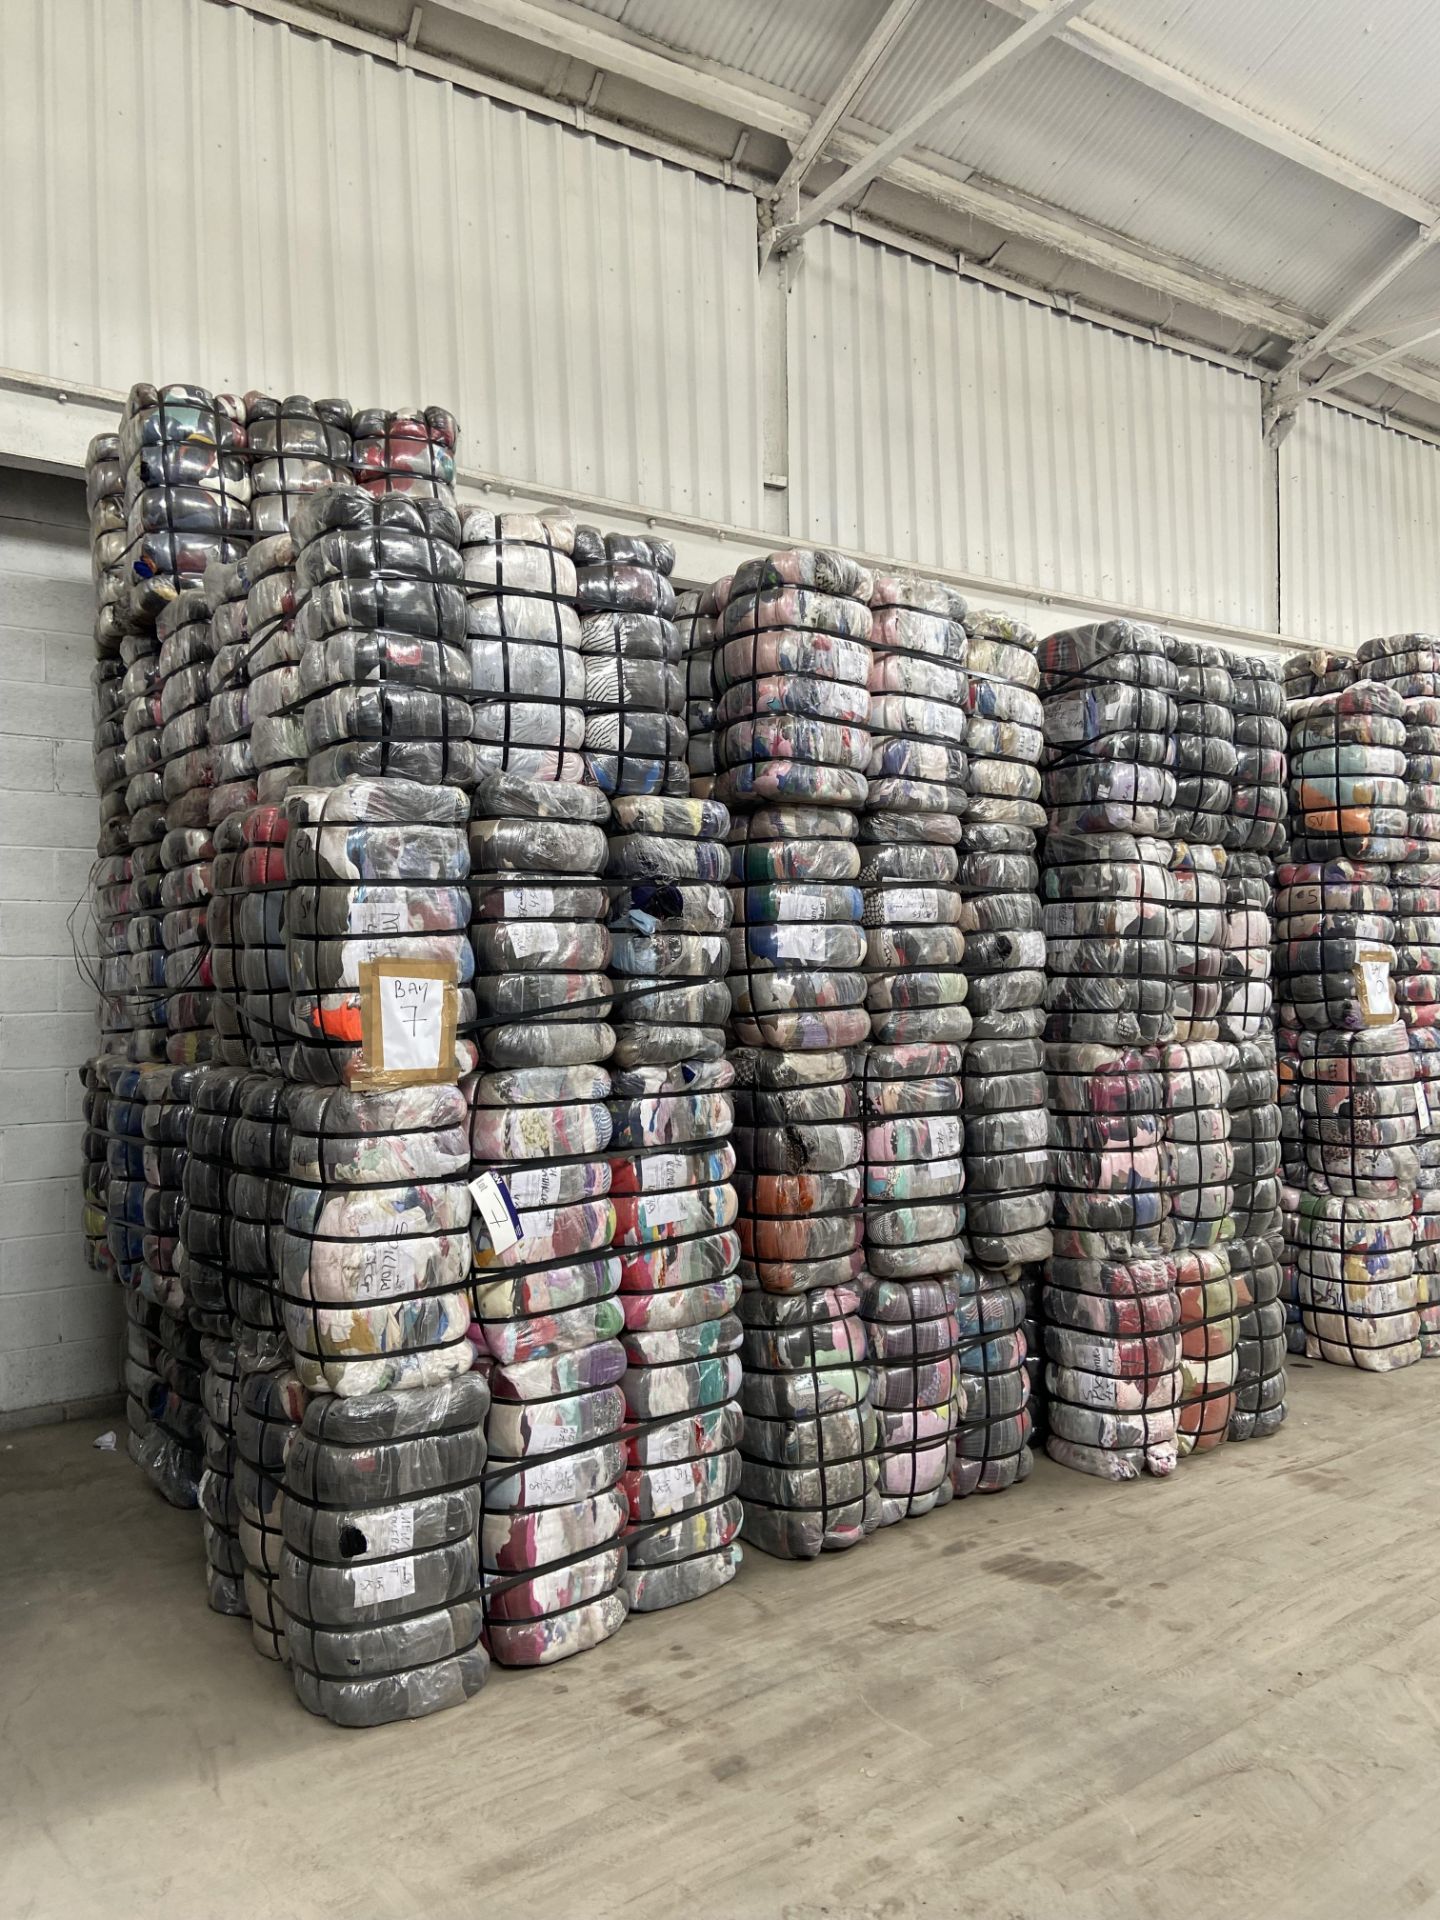 APPROX 216 BALES (9720KG) RECYCLABLE WASTE TEXTILES, understood to comprise: Five bales x 45kg Adult